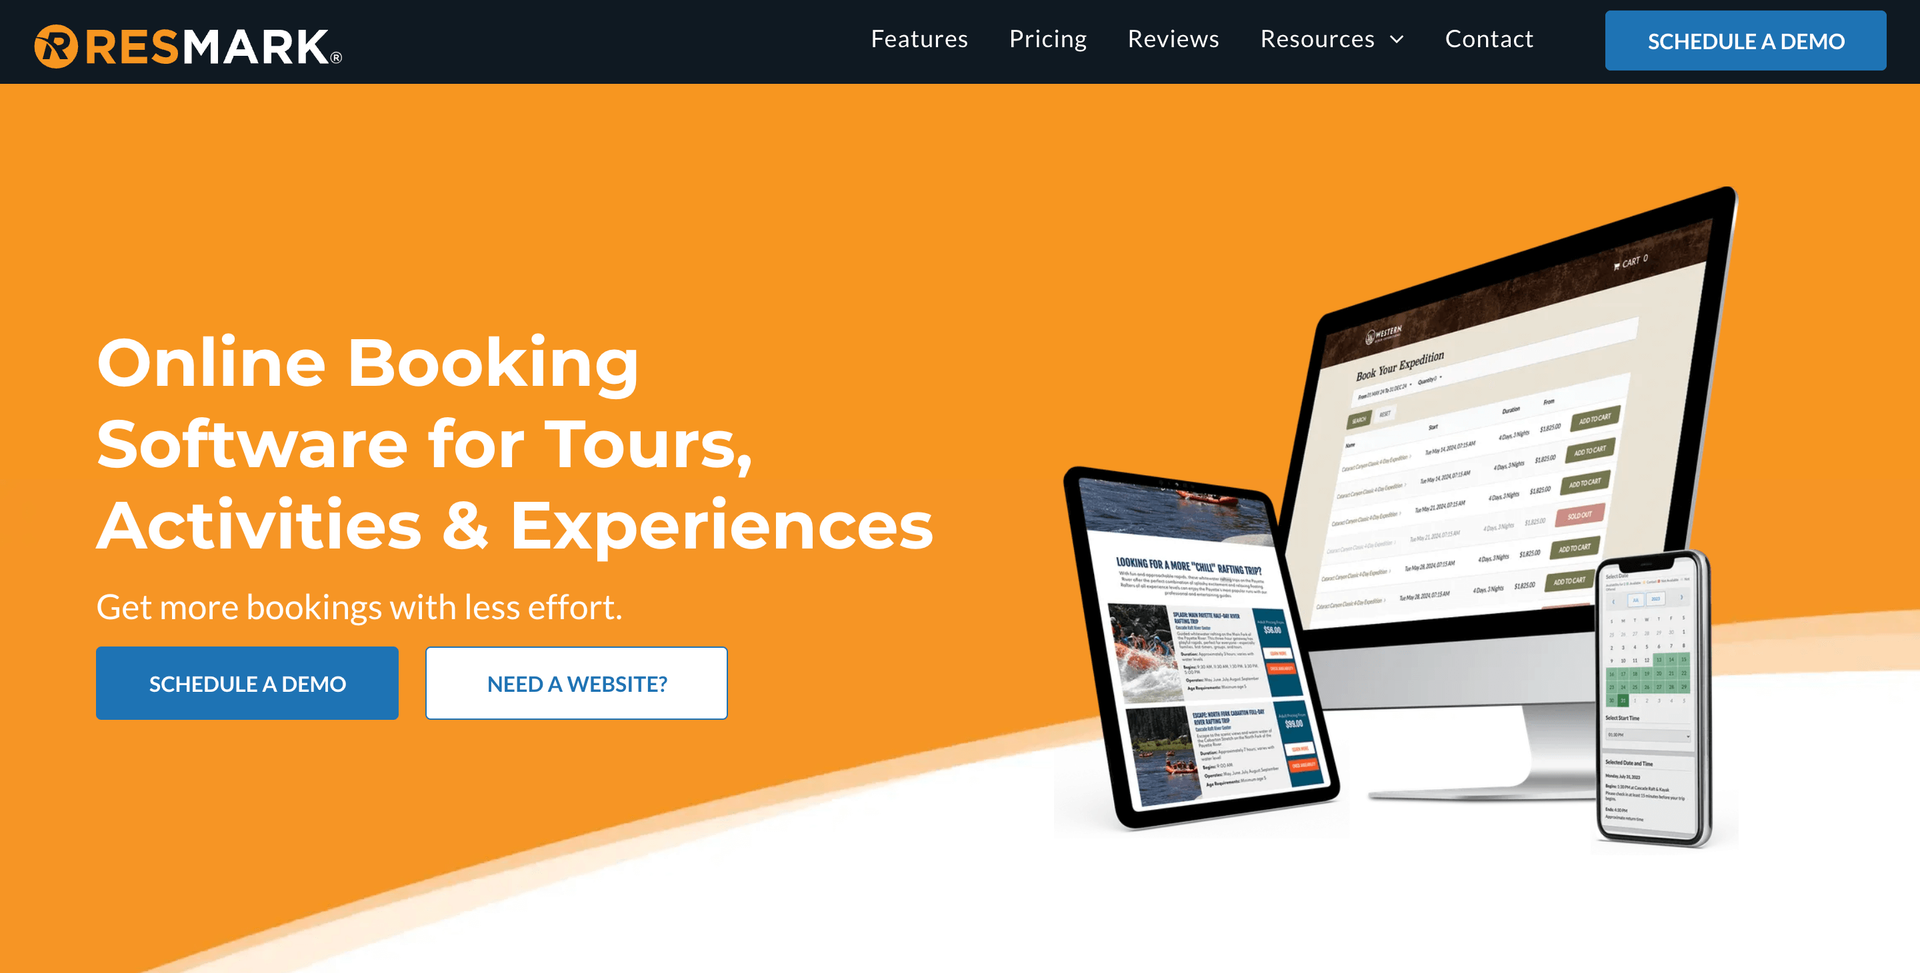 Resmark homepage: Online Booking Software for Tours, Activities & Experiences